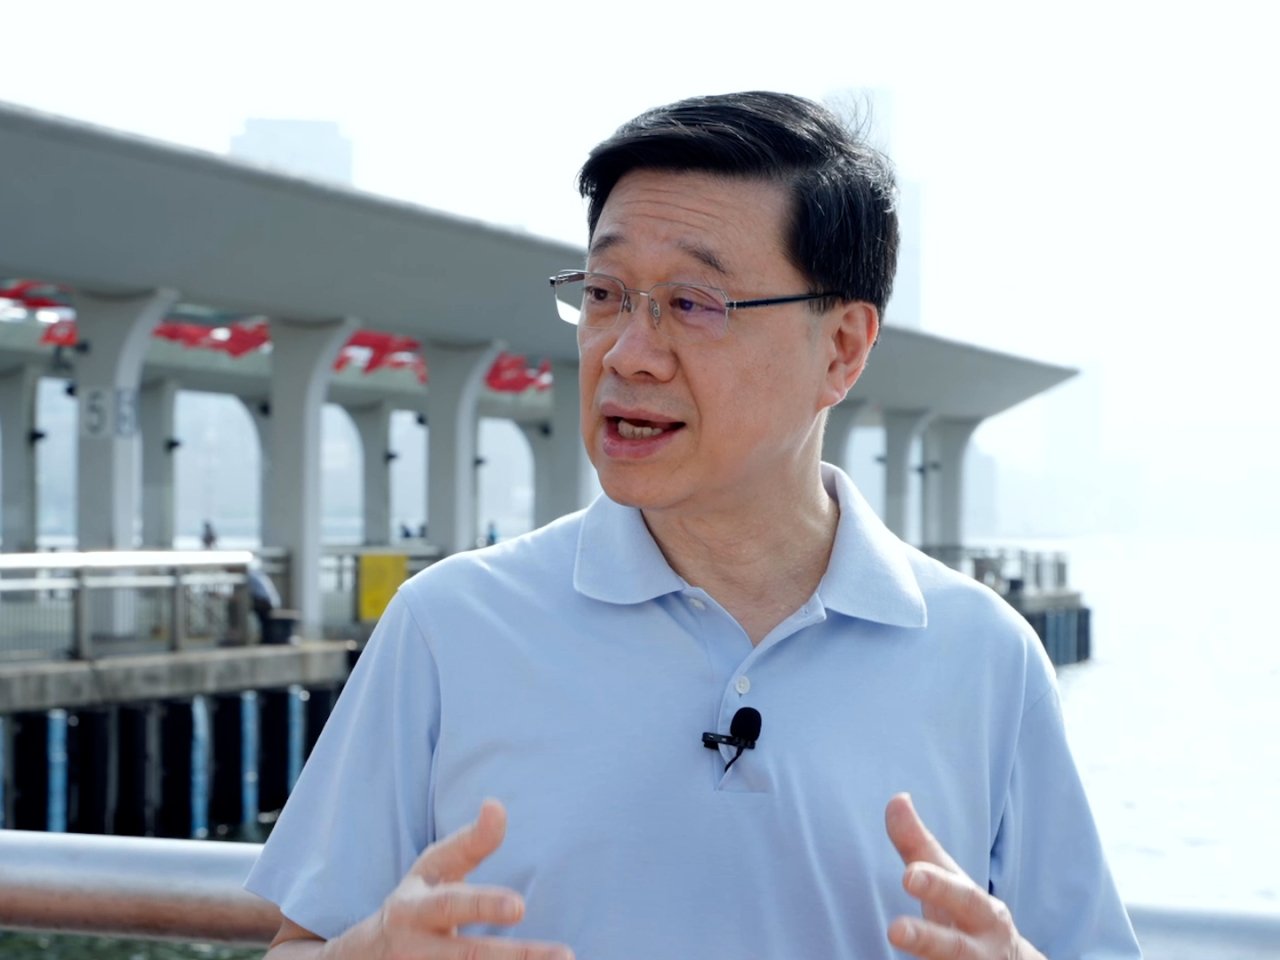 HK has more opportunities than challenges: CE